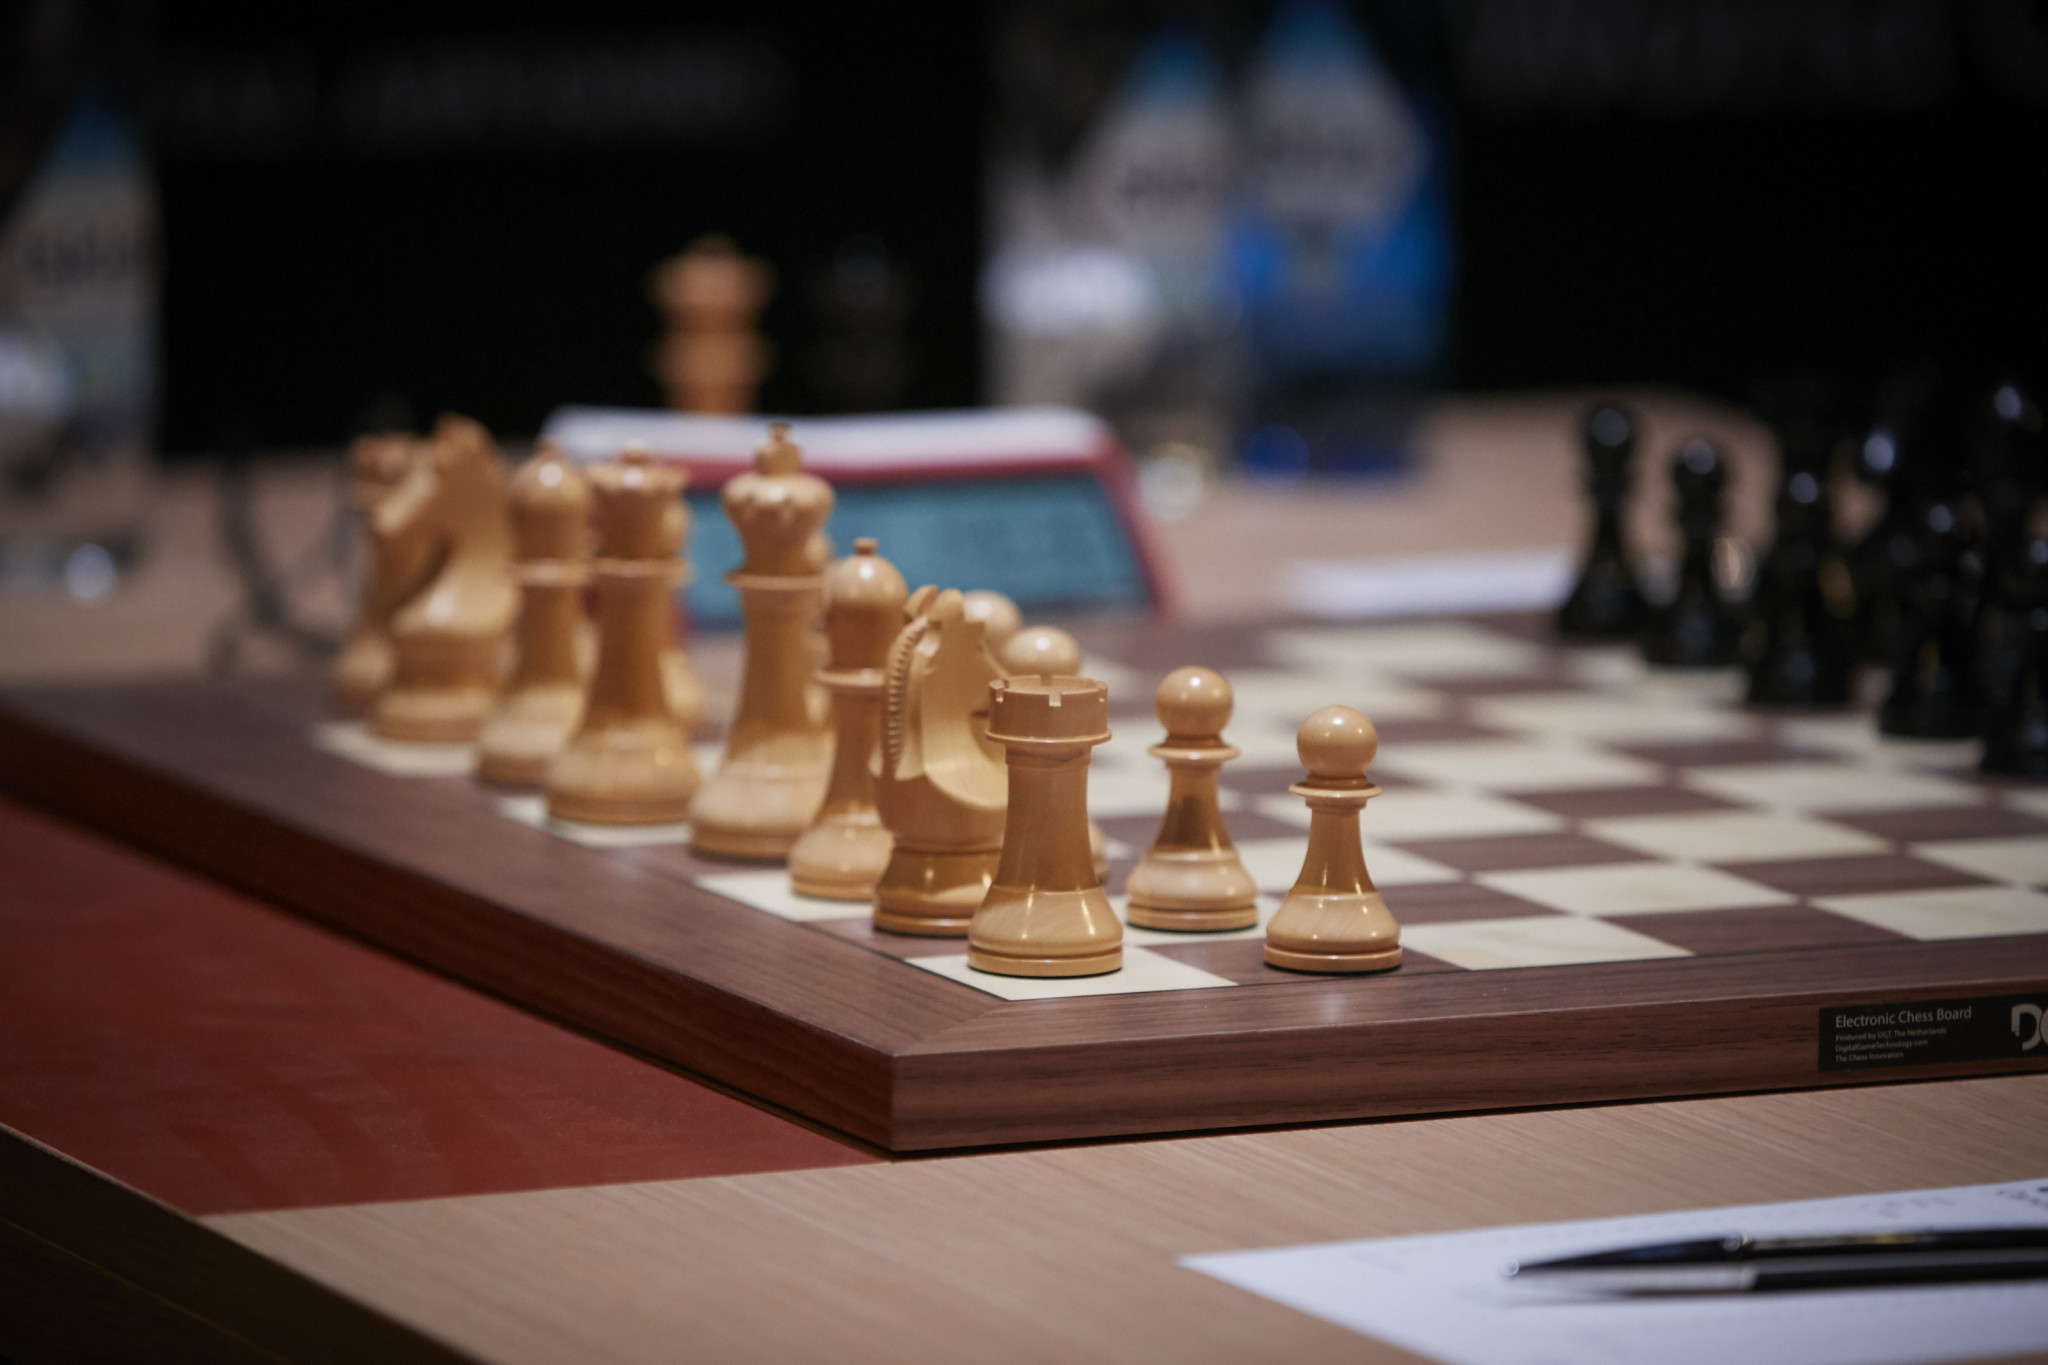 Russia due to compete in Asian Chess Federation competitions under national symbols